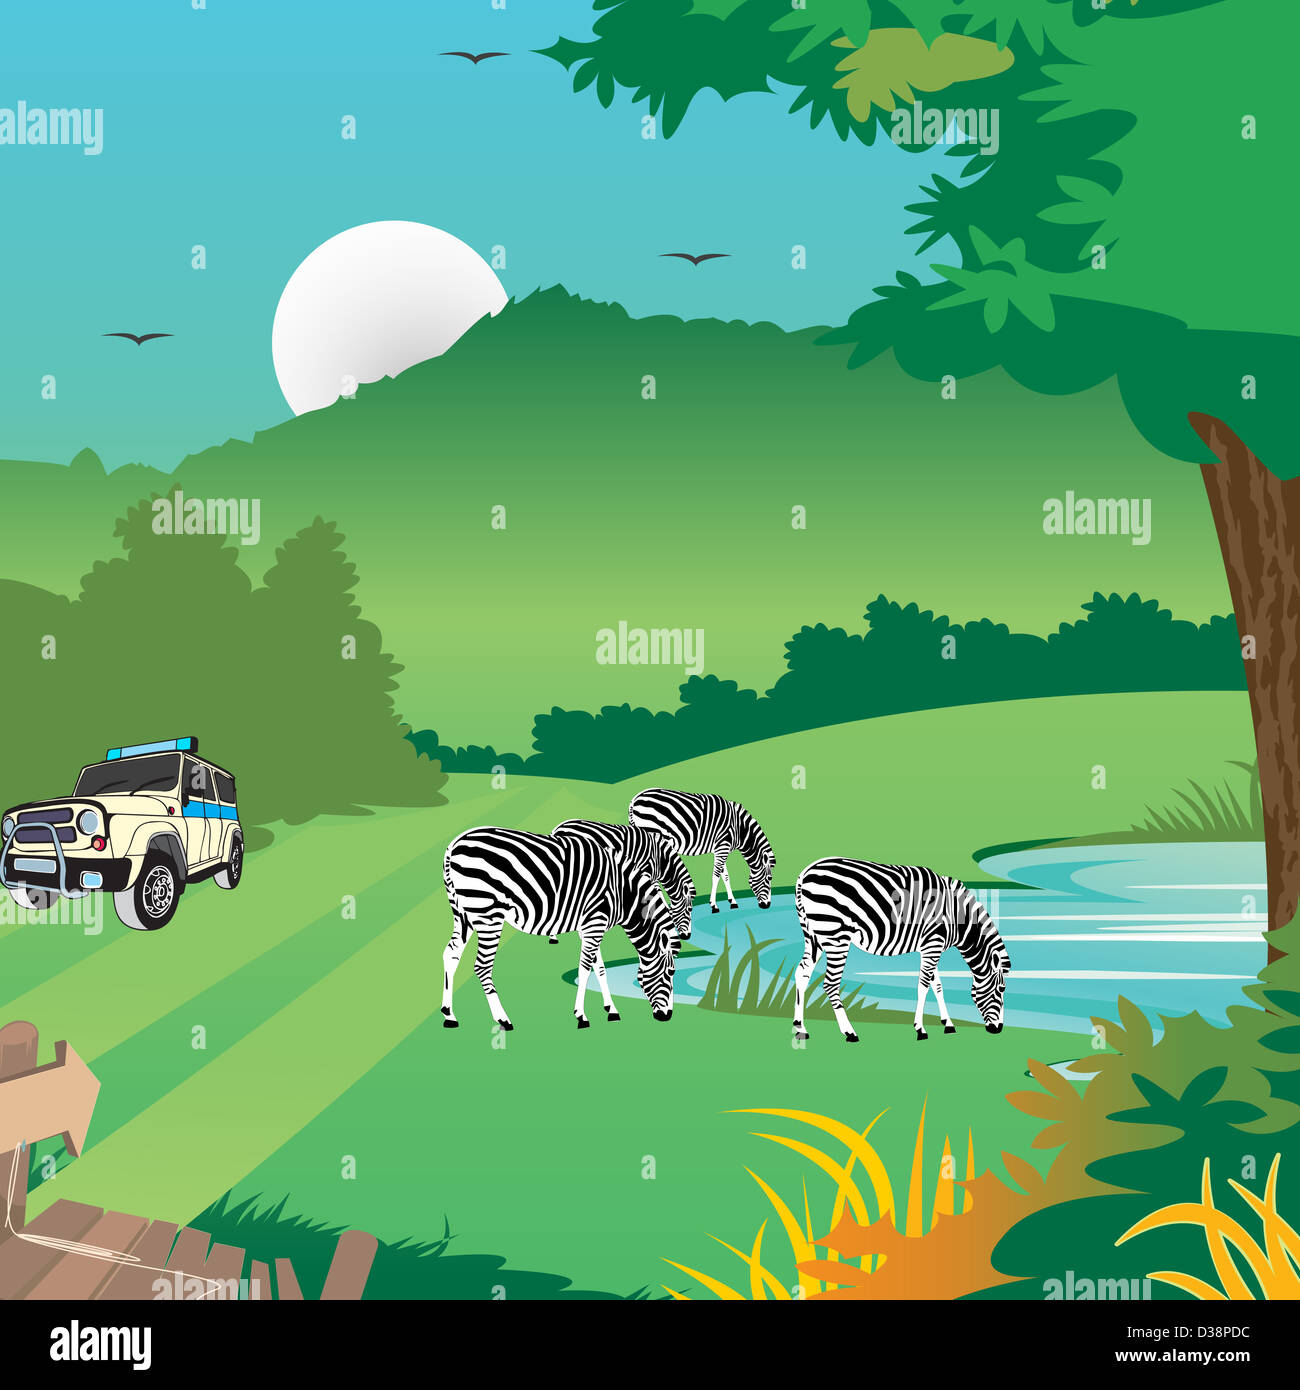 Zebras with a jeep in a forest Stock Photo